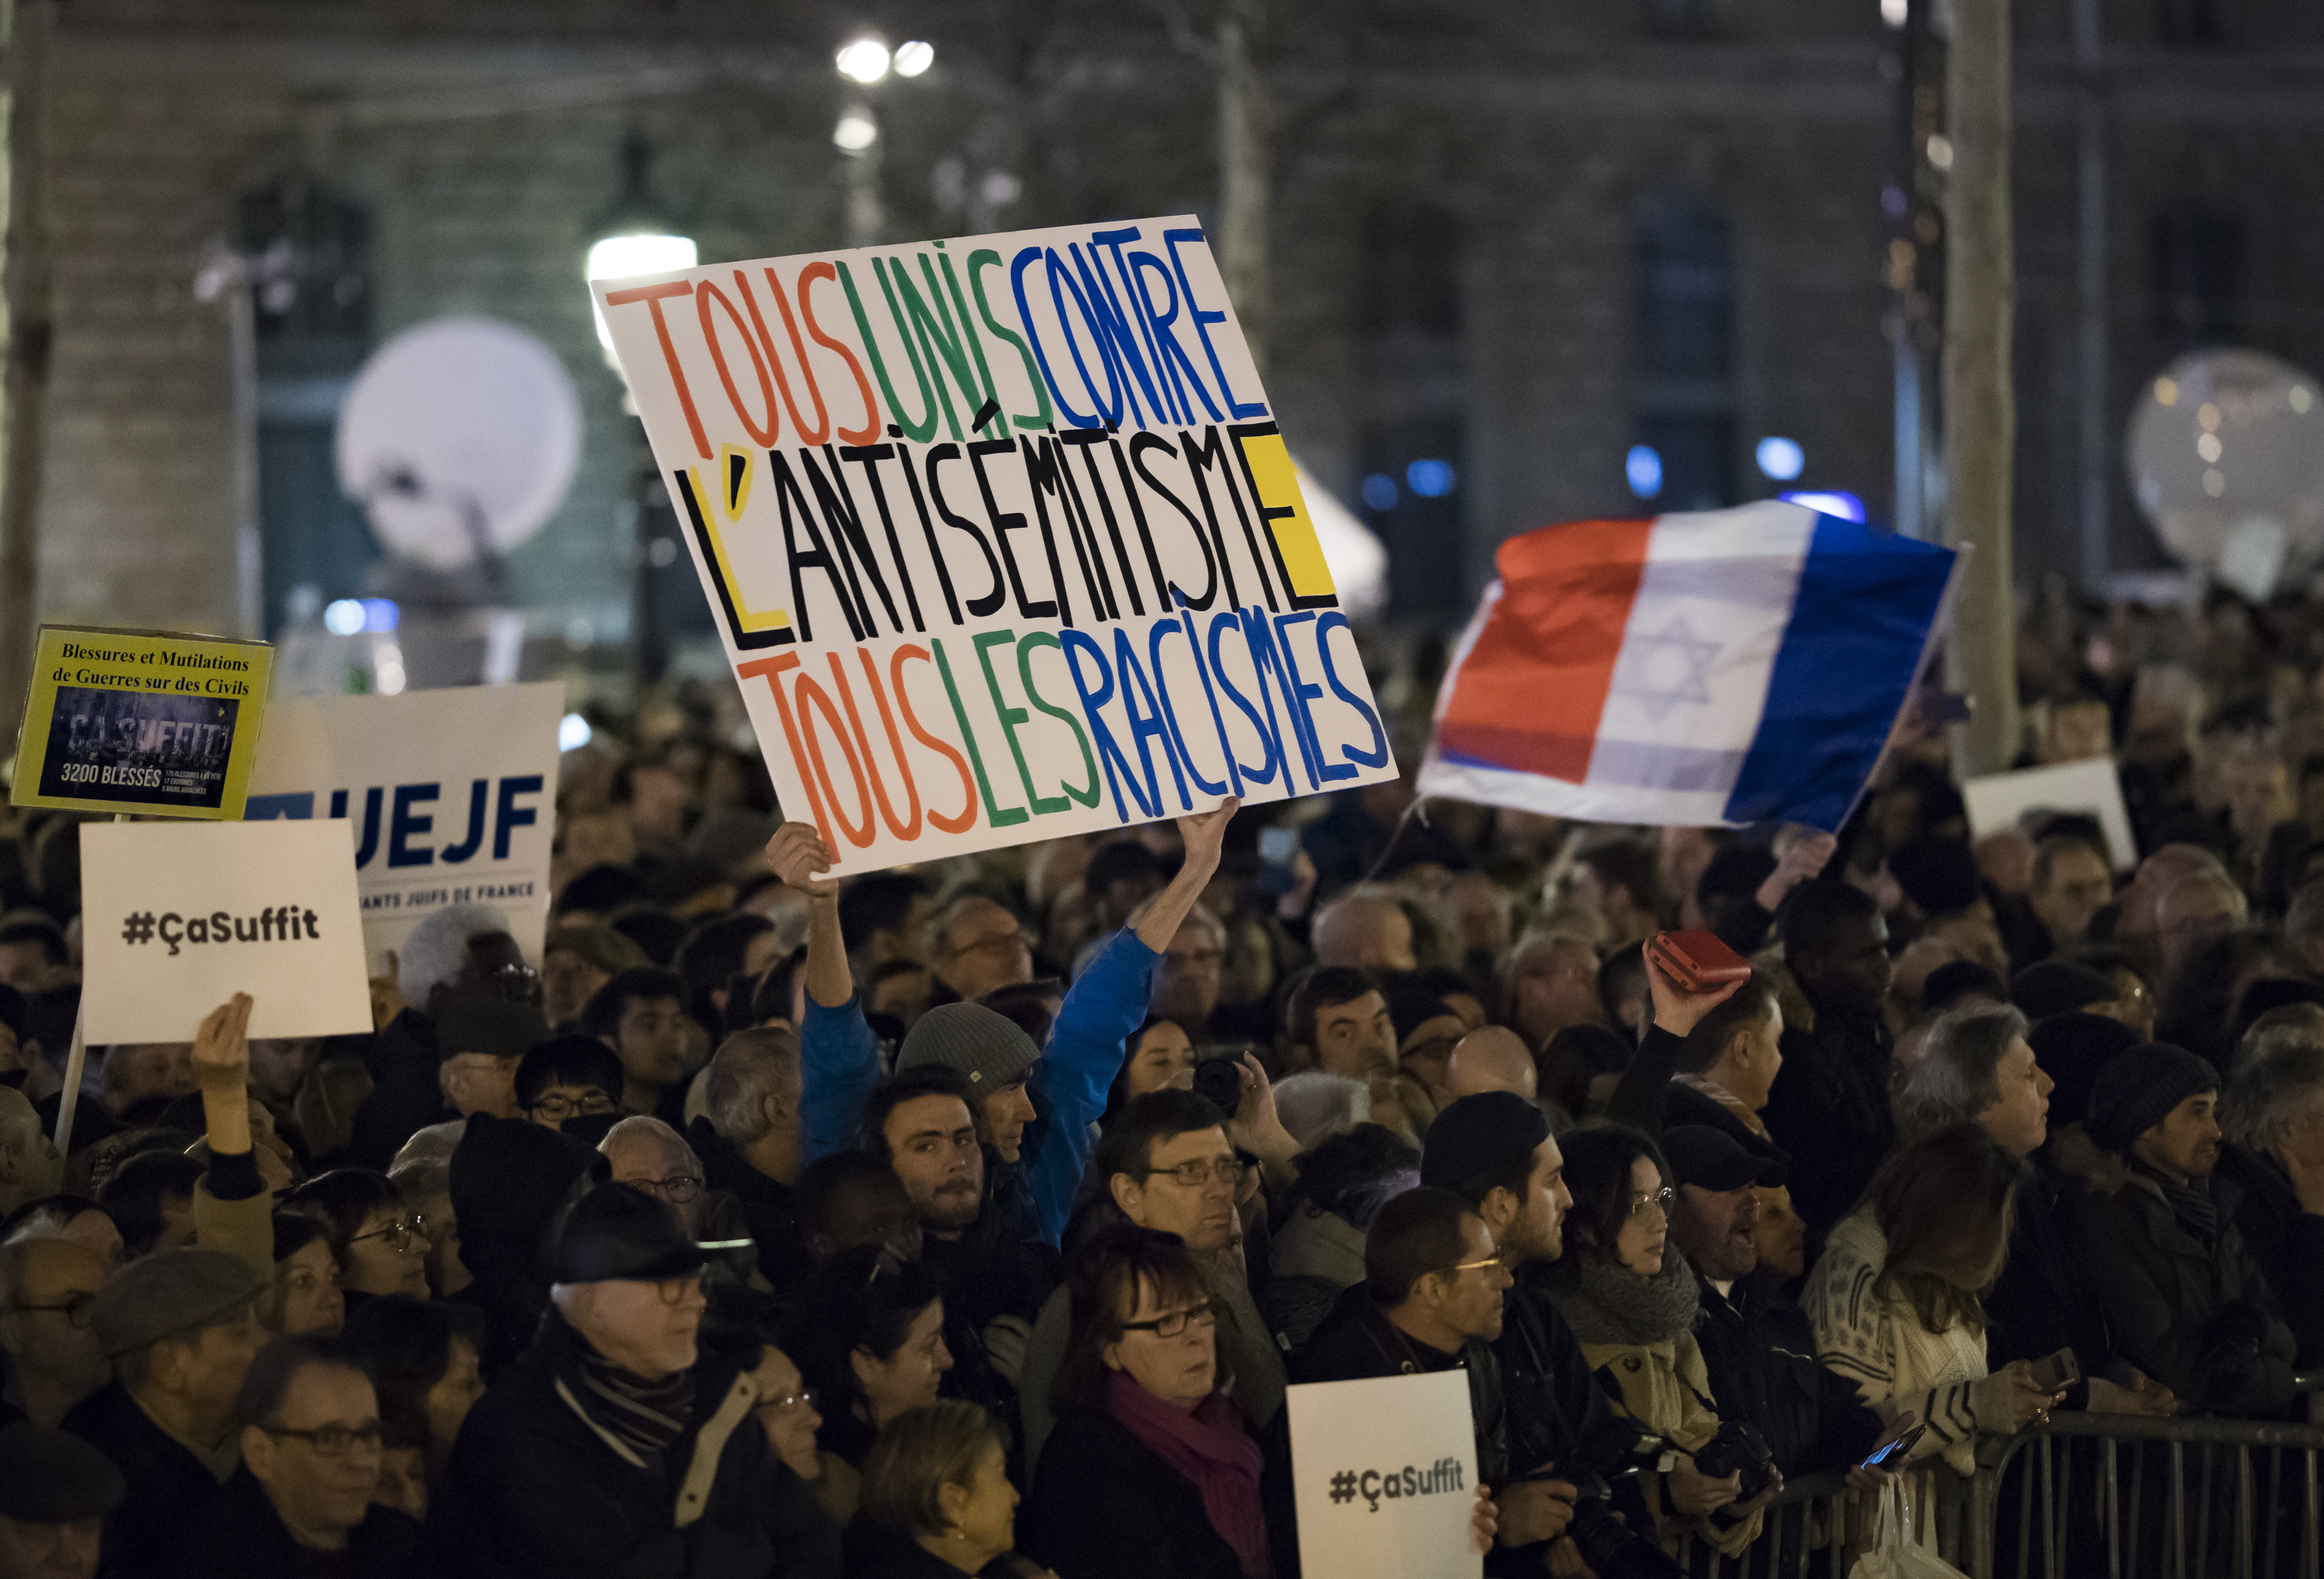 epa07381710 People attend nation-wide rally to protest against antisemitism after media reports noted a recent sharp rise in anti-semitic acts across the country,  on the Place de la Republique in Paris, France, 19 February 2019. Sign reads 'All united against Antisemitism, all the racisms' French residents and public officials from across the political spectrum gathered for nationwide rallies against anti-Semitism following a series of anti-Semitic acts, including the swastikas painted on about 80 gravestones at a Jewish cemetery overnight.  EPA/IAN LANGSDON